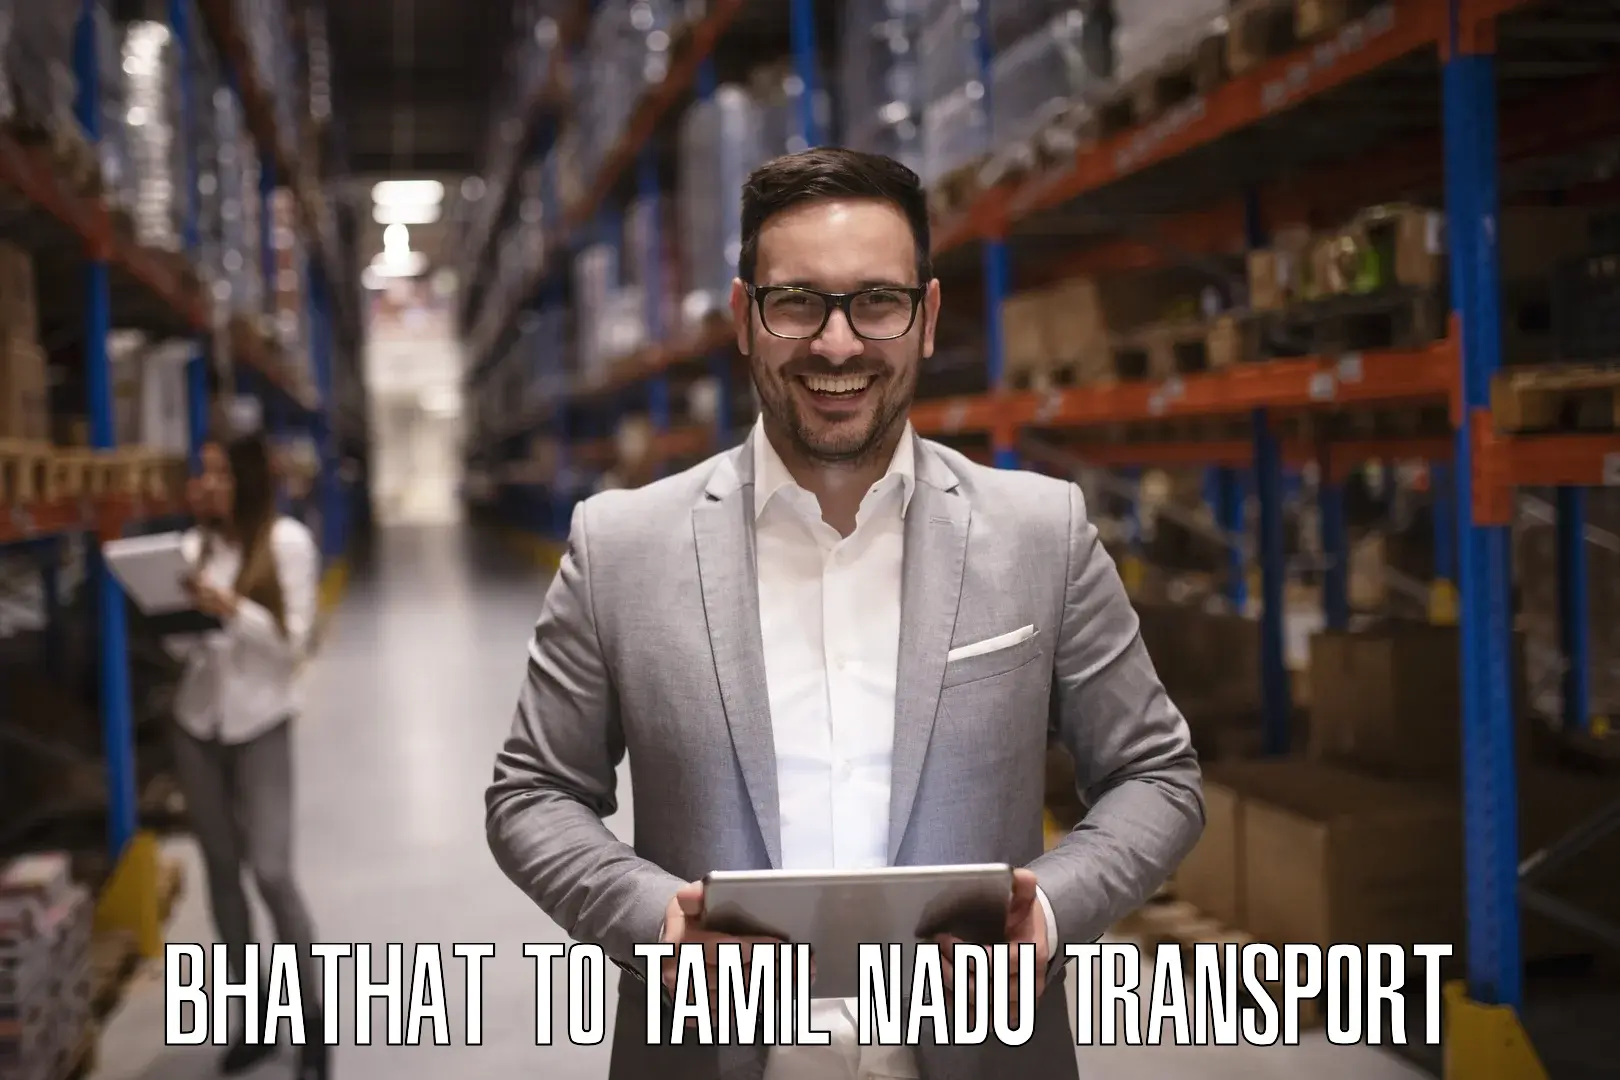 Transport in sharing Bhathat to Tamil Nadu